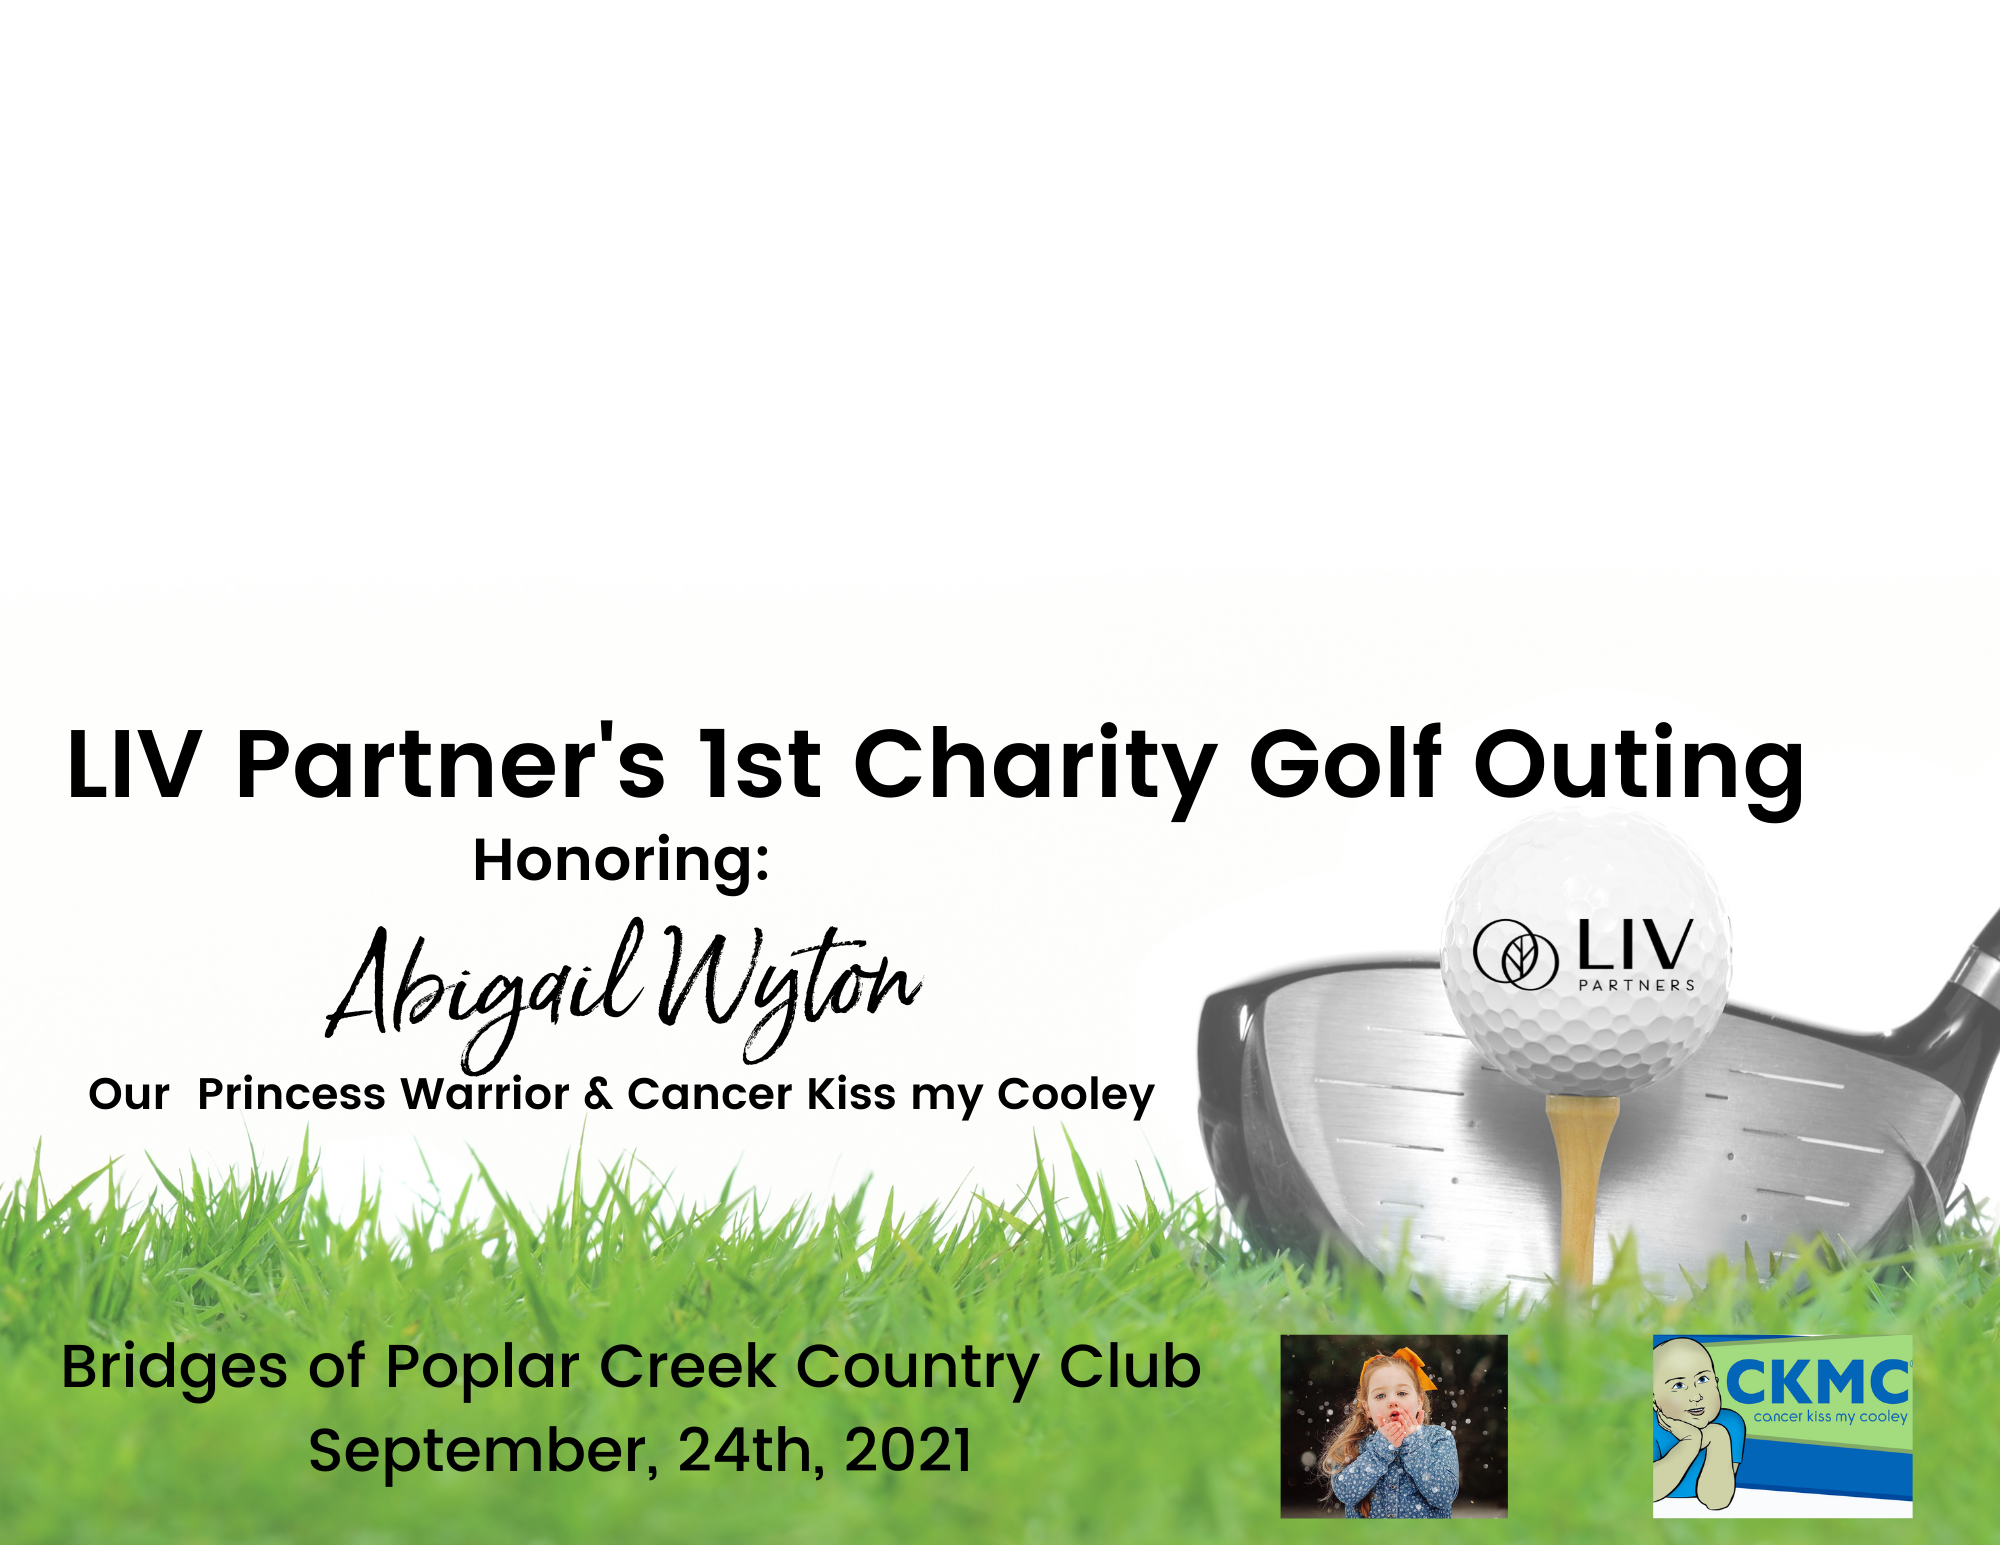 LIV Partners is excited to Invite you to our 1st Annual Charity Golf Outing